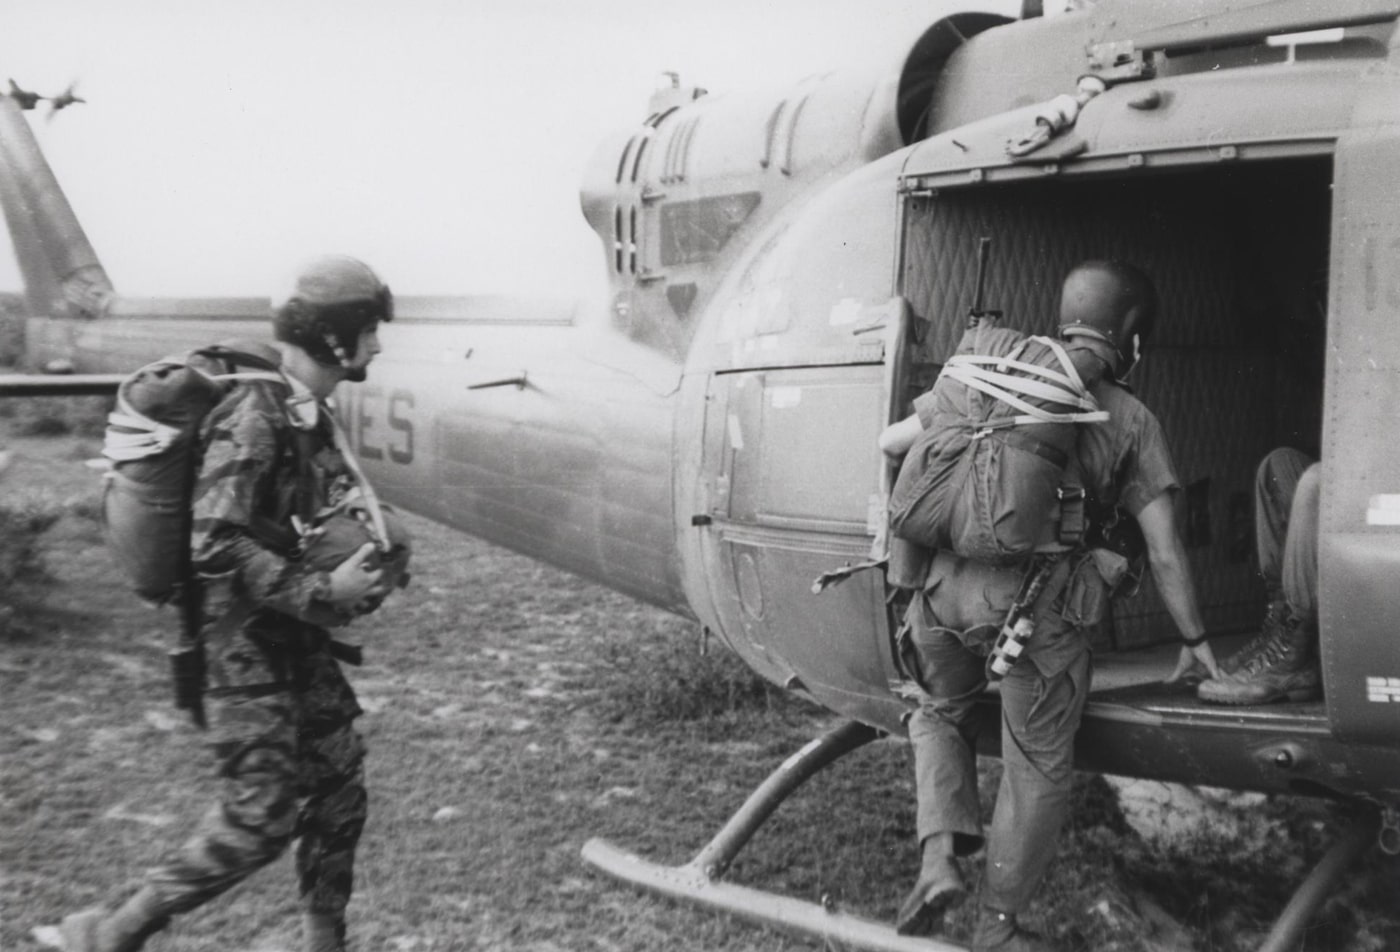 In this photo, we see U.S. Marines of 3rd Force Reconnaissance Company (3rd Force Recon) climb aboard a UH-1E for a paradrop during the Vietnam War. Image: Sgt. J.G. McCullough/U.S.M.C.